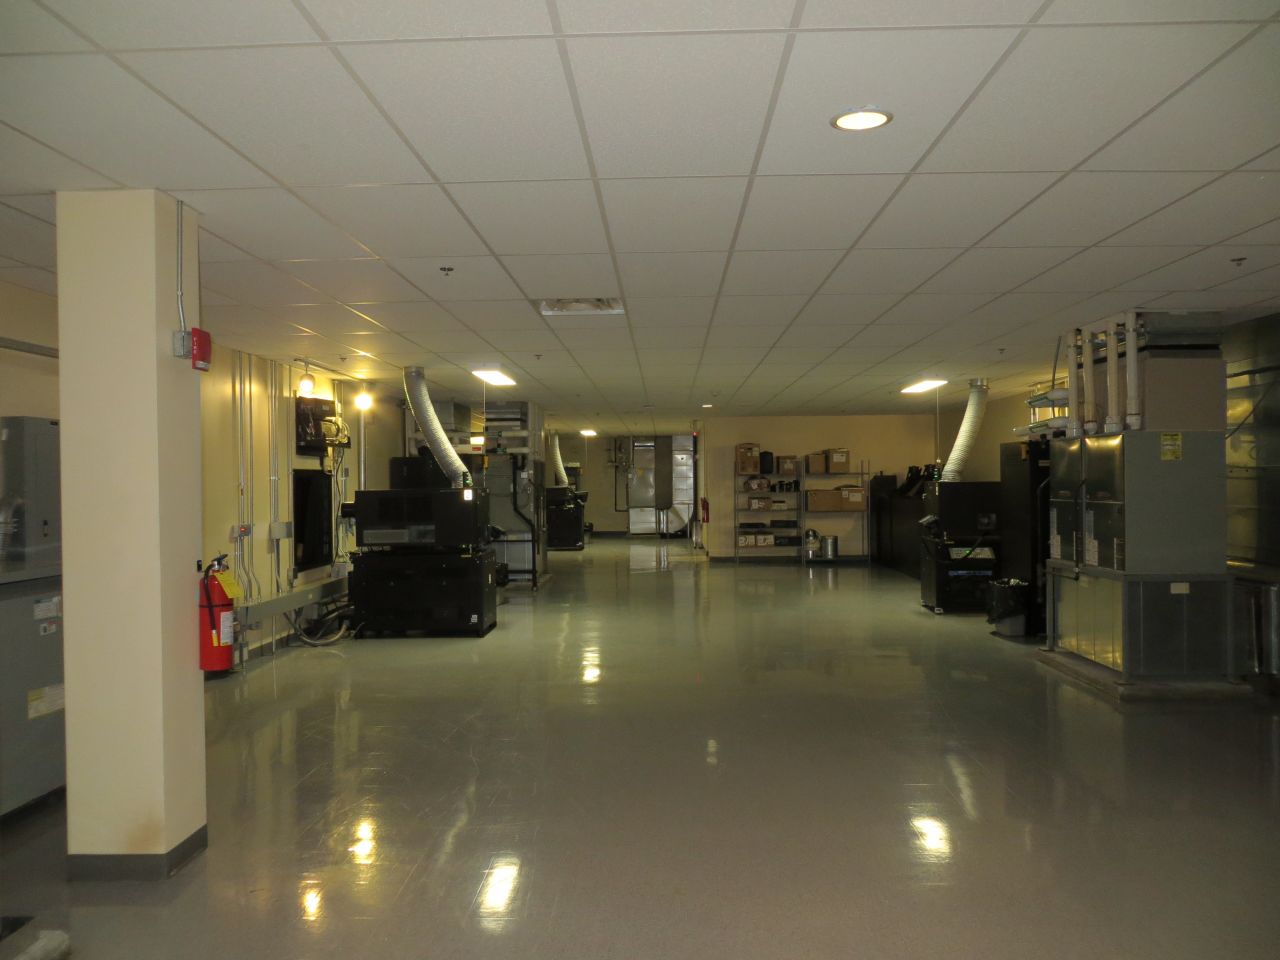 Today, the projection room at many multiplexes, such as Atlanta's Regal Atlantic Station 16 theater, is a wide corridor featuring digital projectors (large black boxes, like the one on the left) and servers.